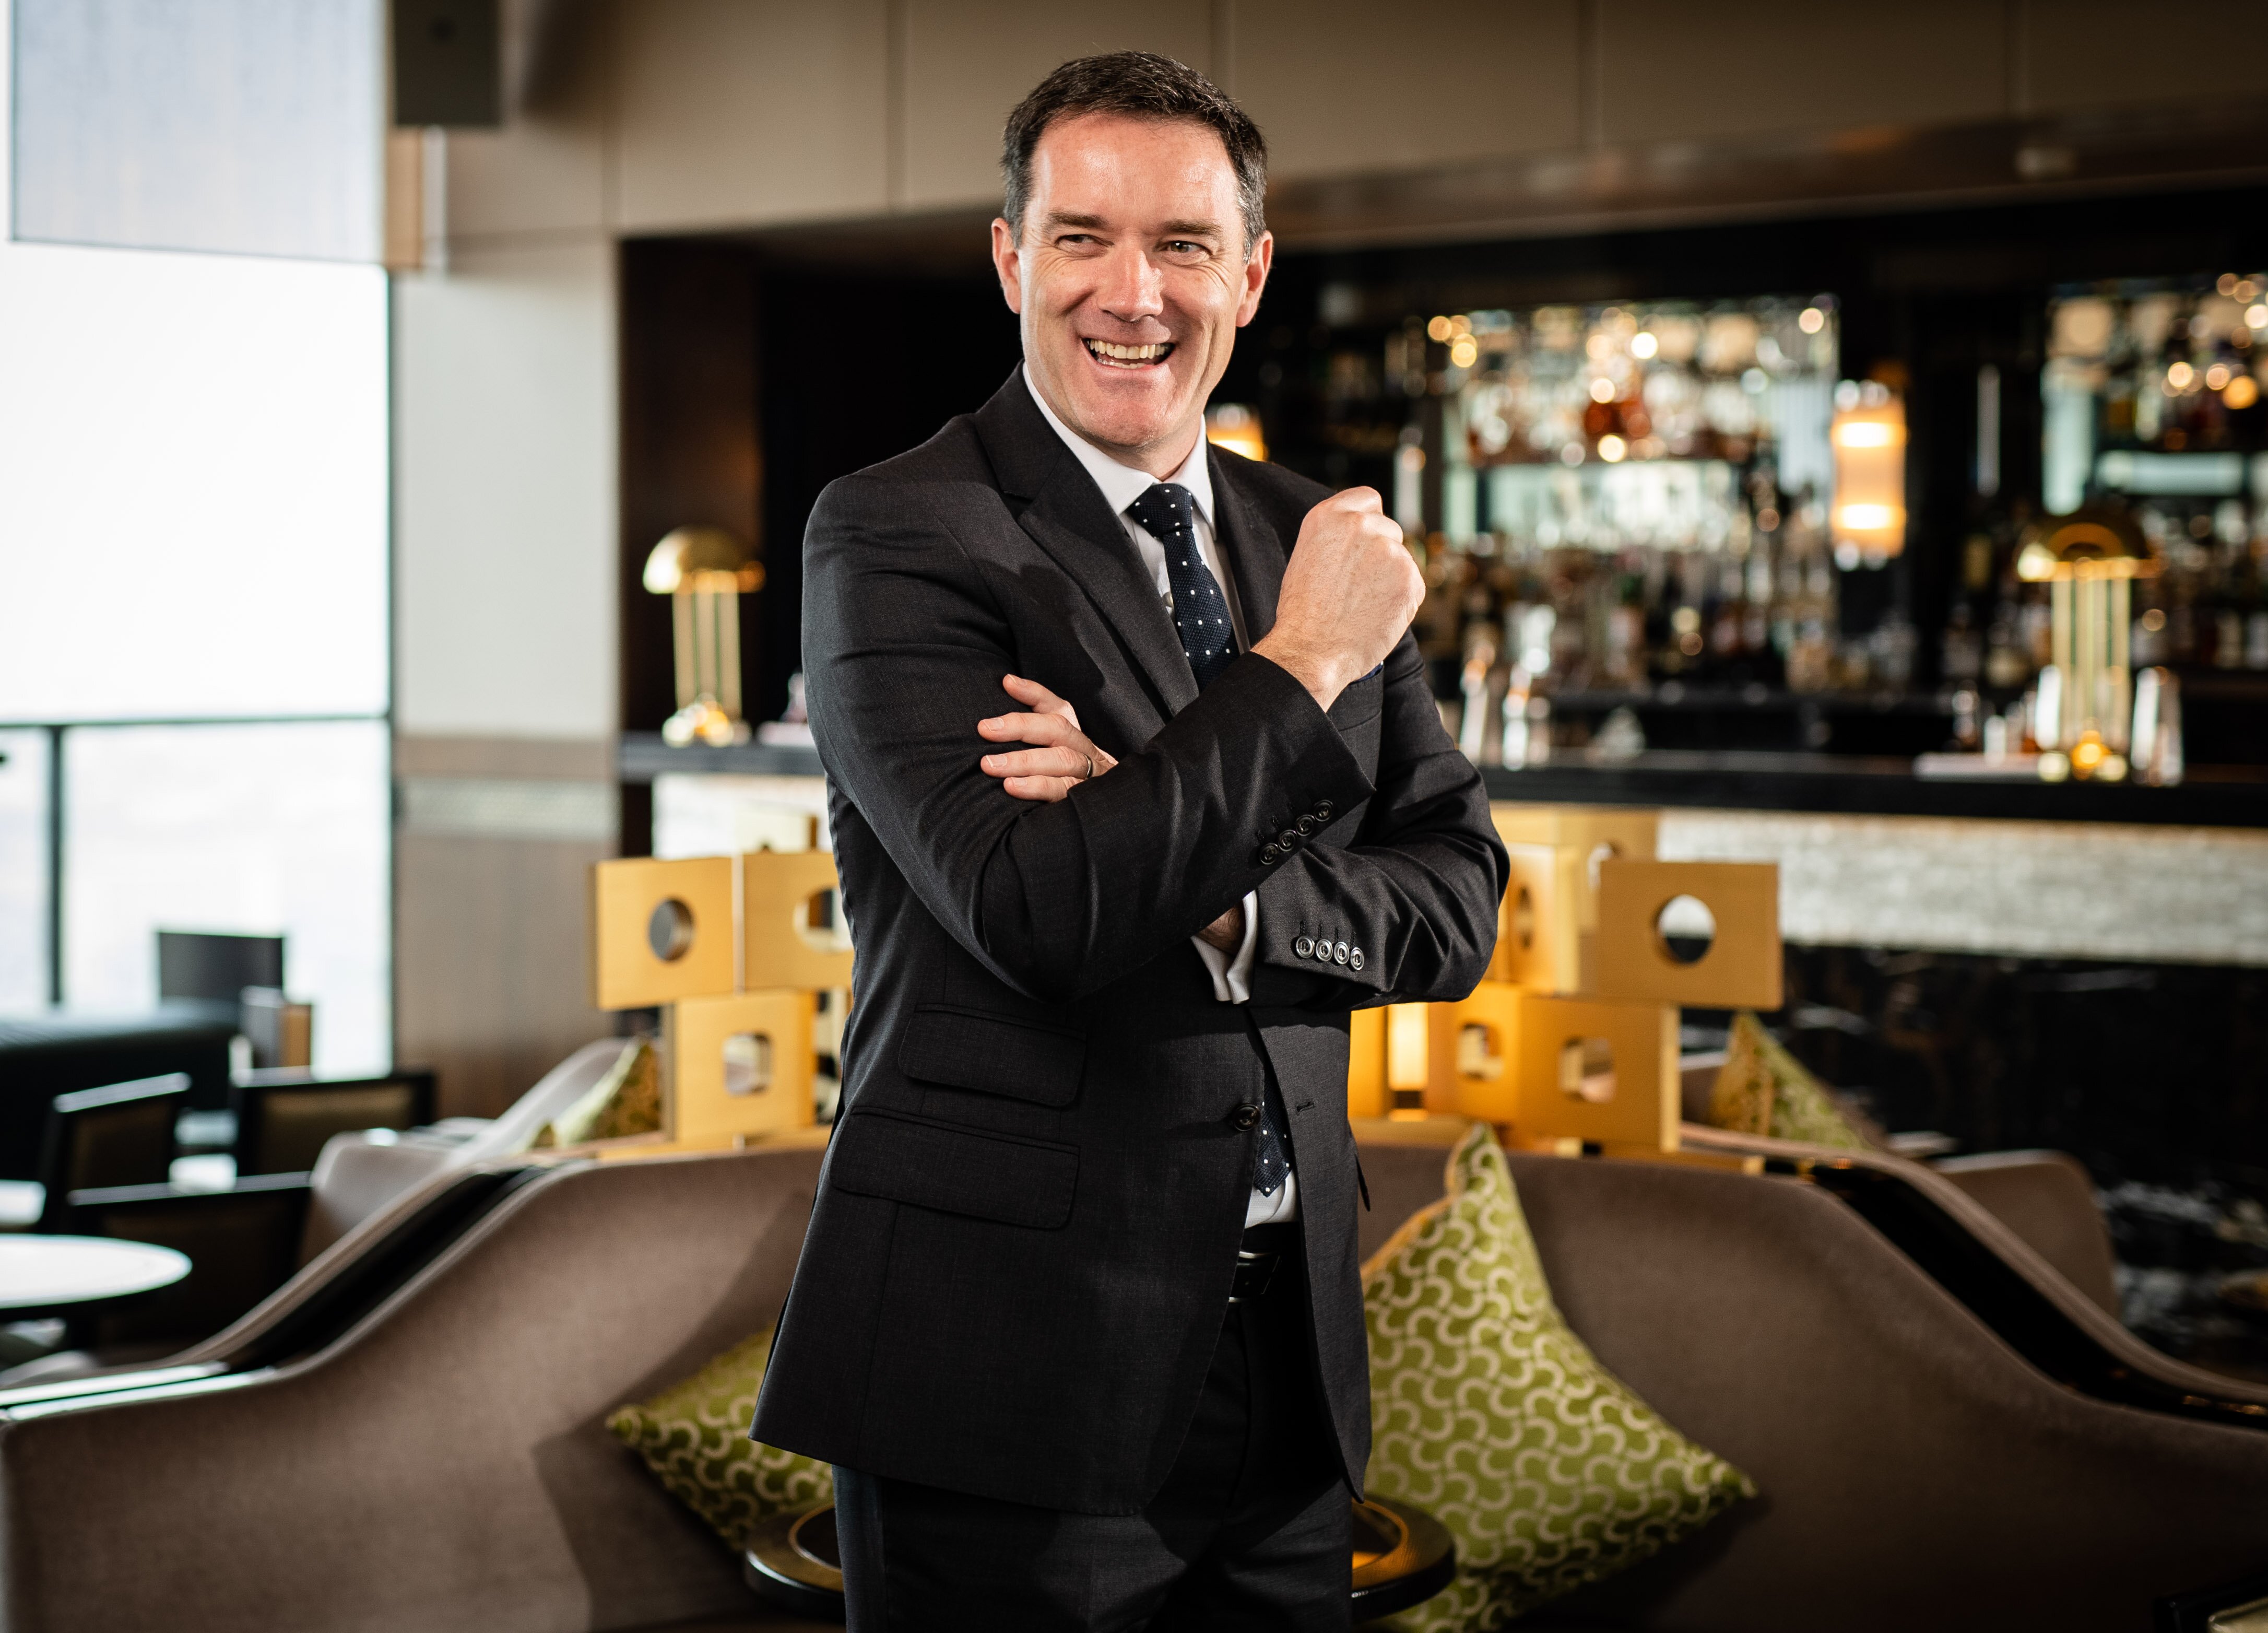 The Caterer interview: Steve Cassidy